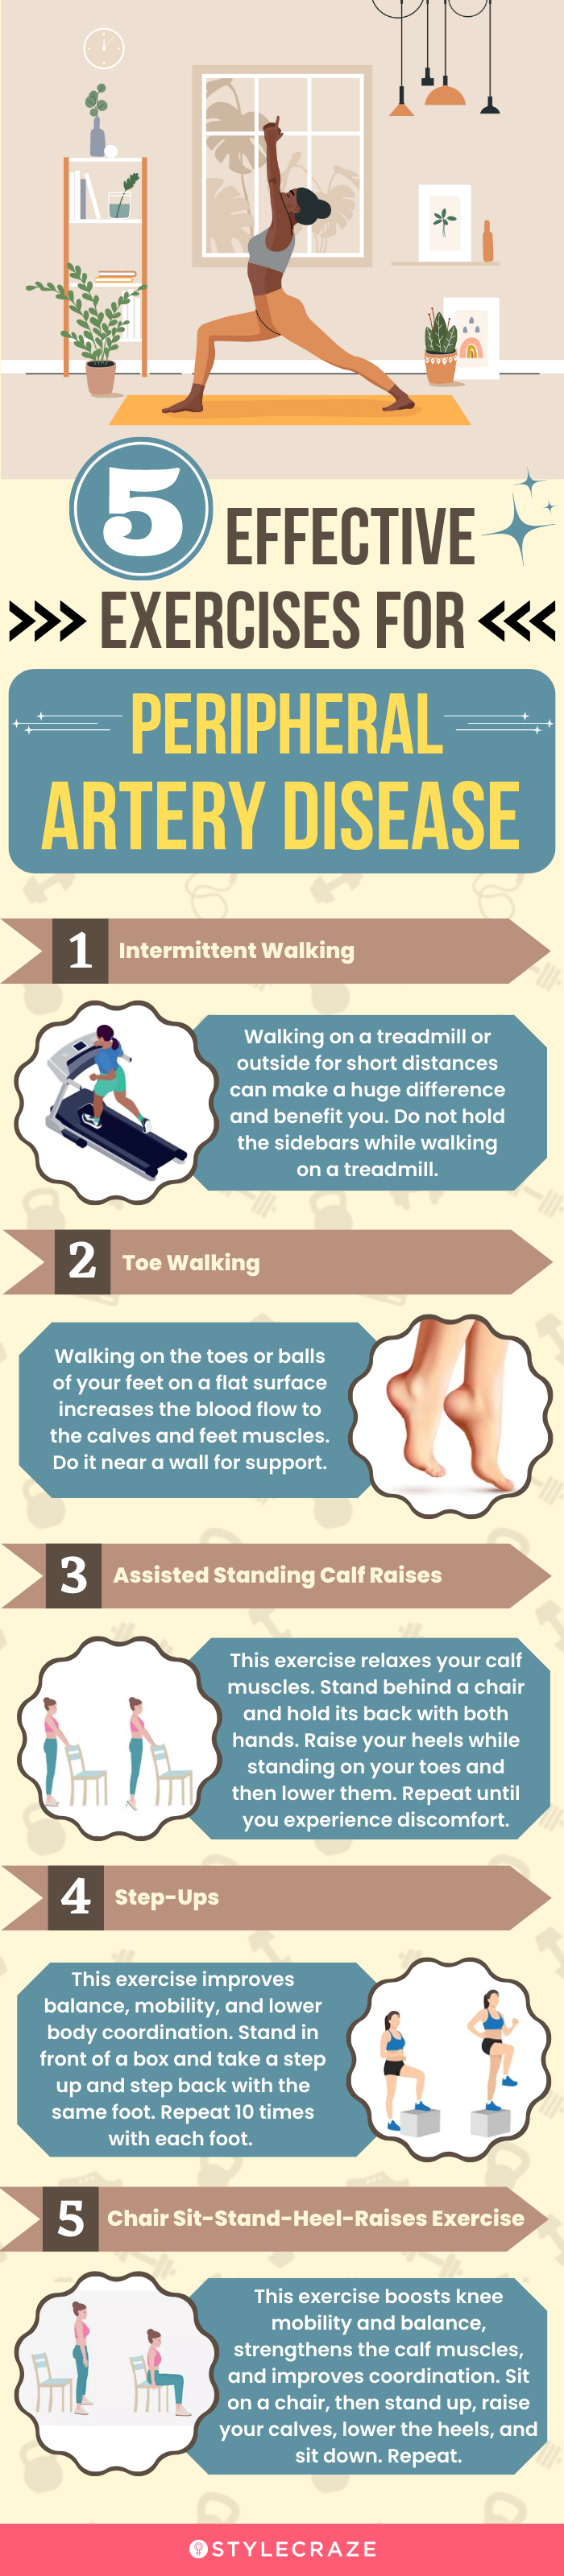 5 effective exercises for peripheral artery disease (infographic)